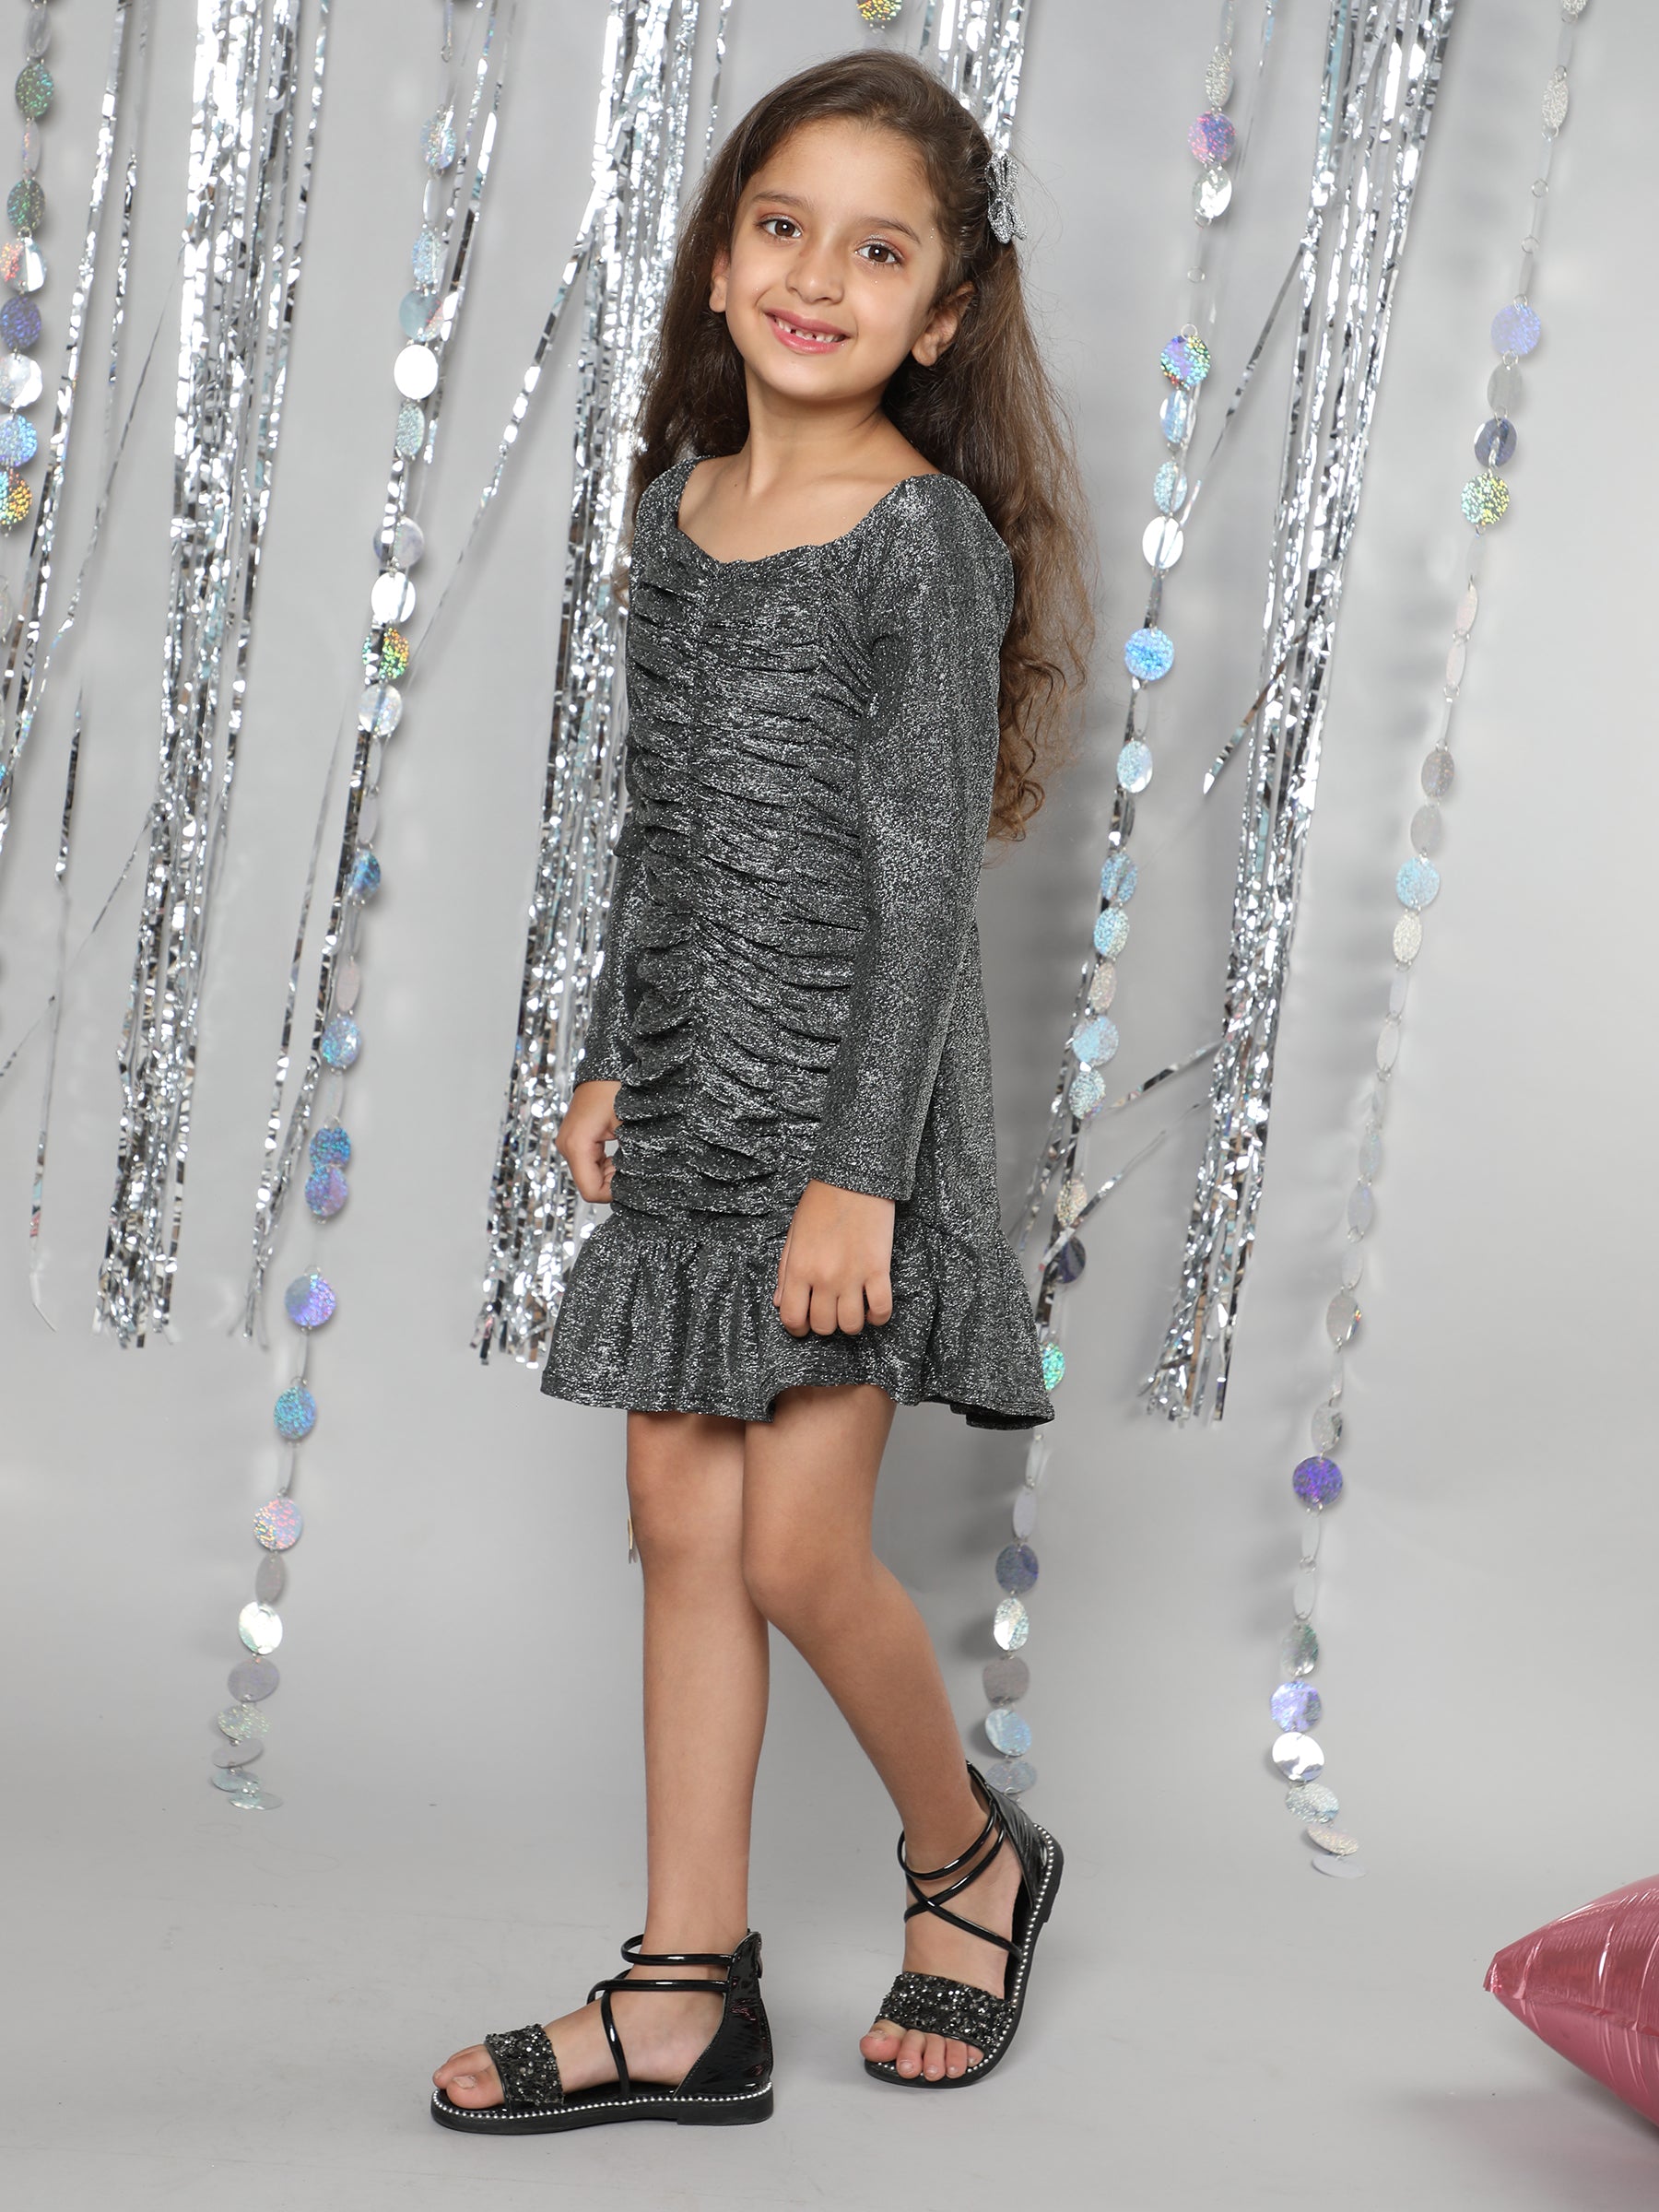 Taffykids full sleeves front rushed glittered party dress-Black